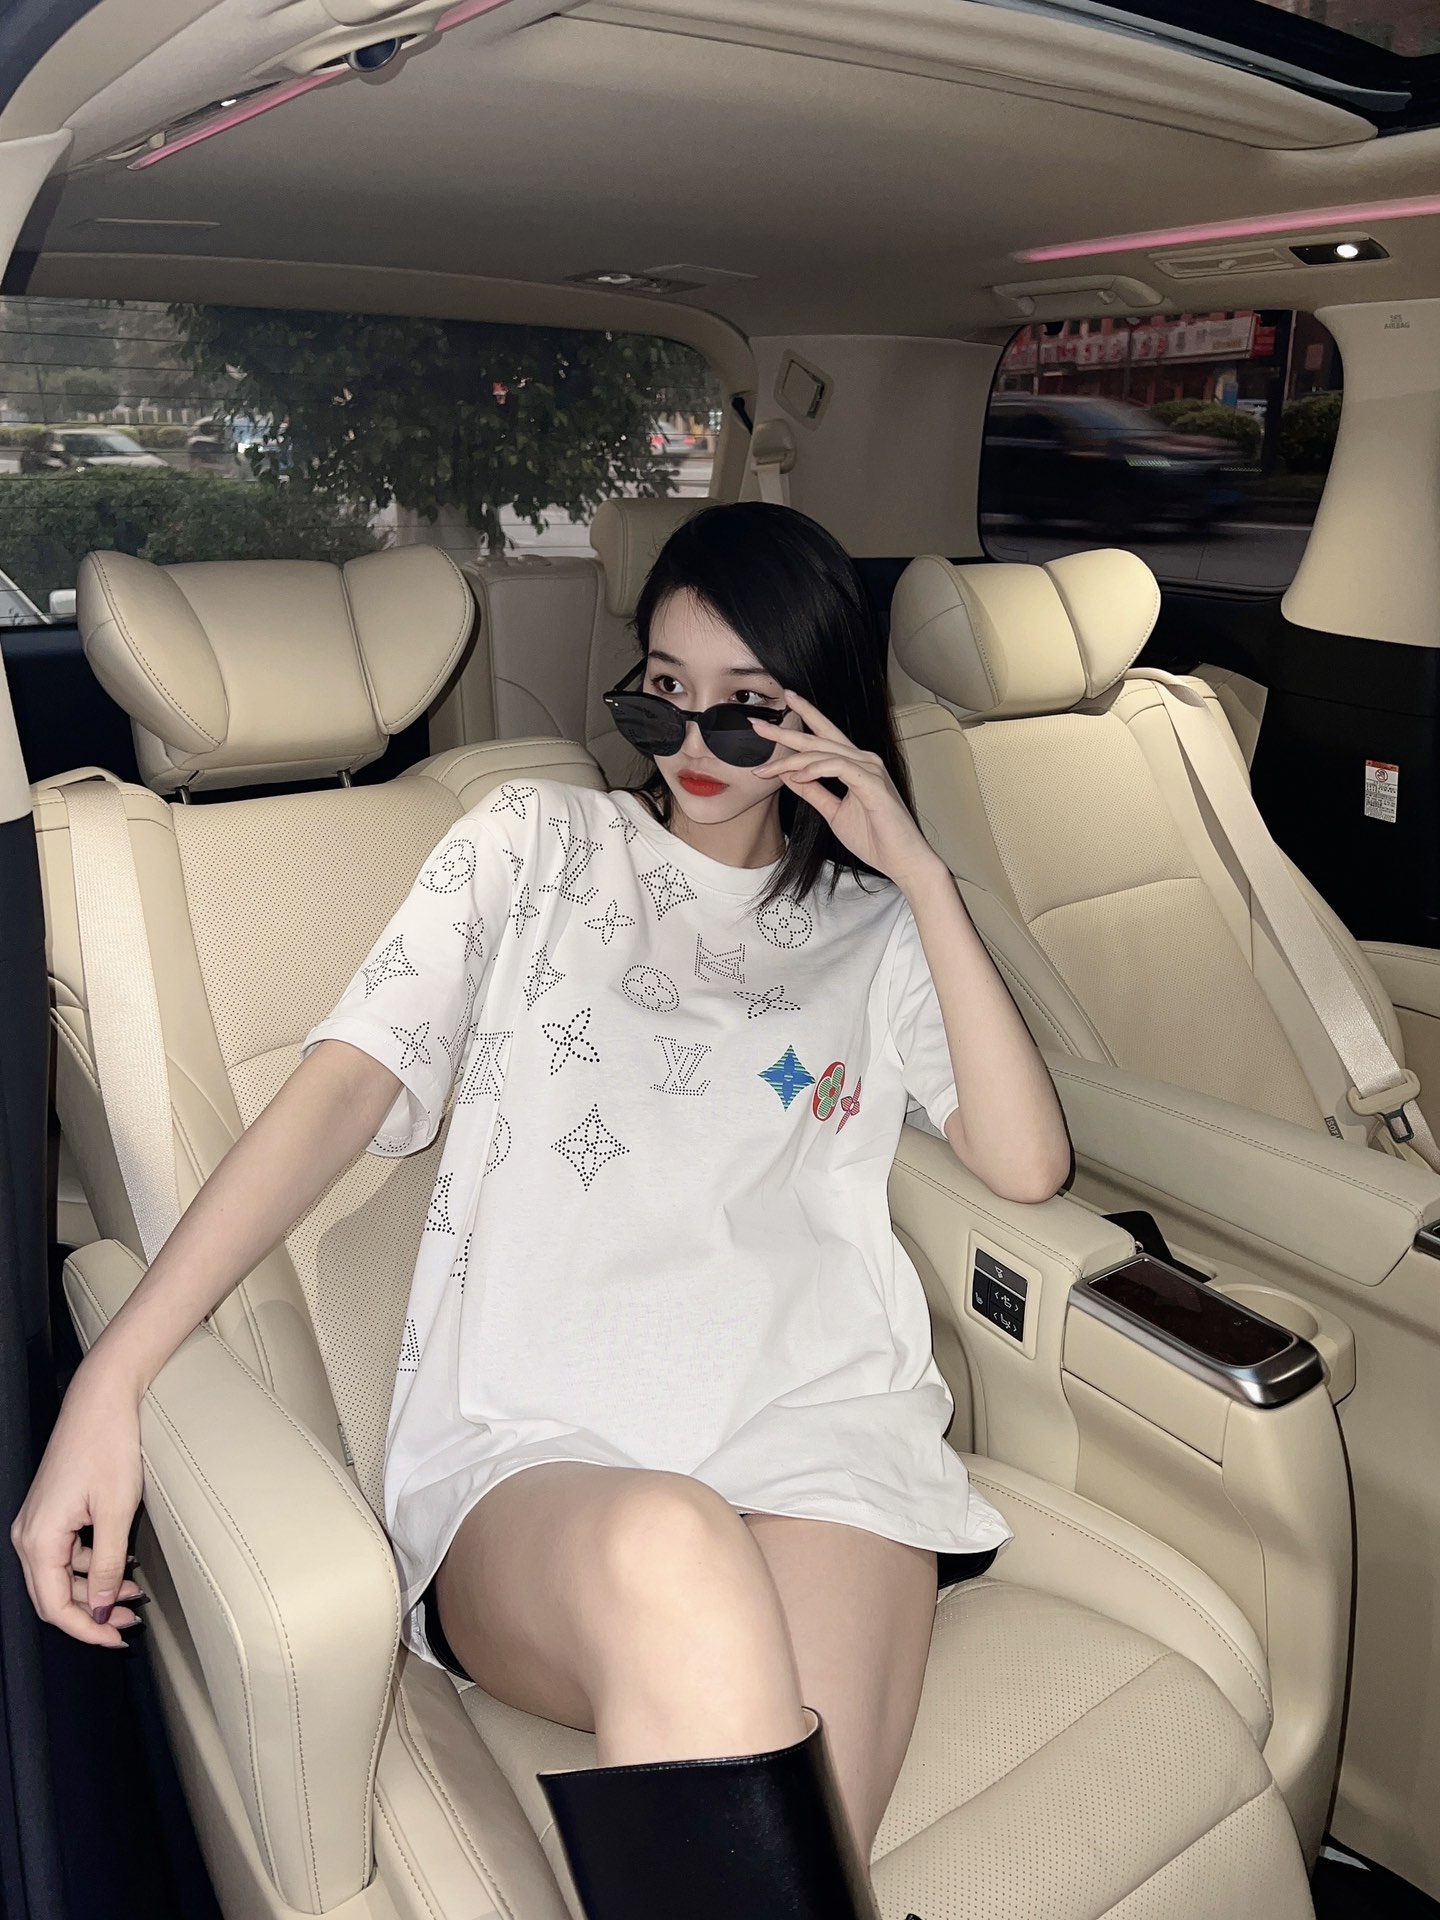 Louis Vuitton Flawless
 Clothing T-Shirt Black White Printing Unisex Cotton Spring/Summer Collection Fashion Short Sleeve